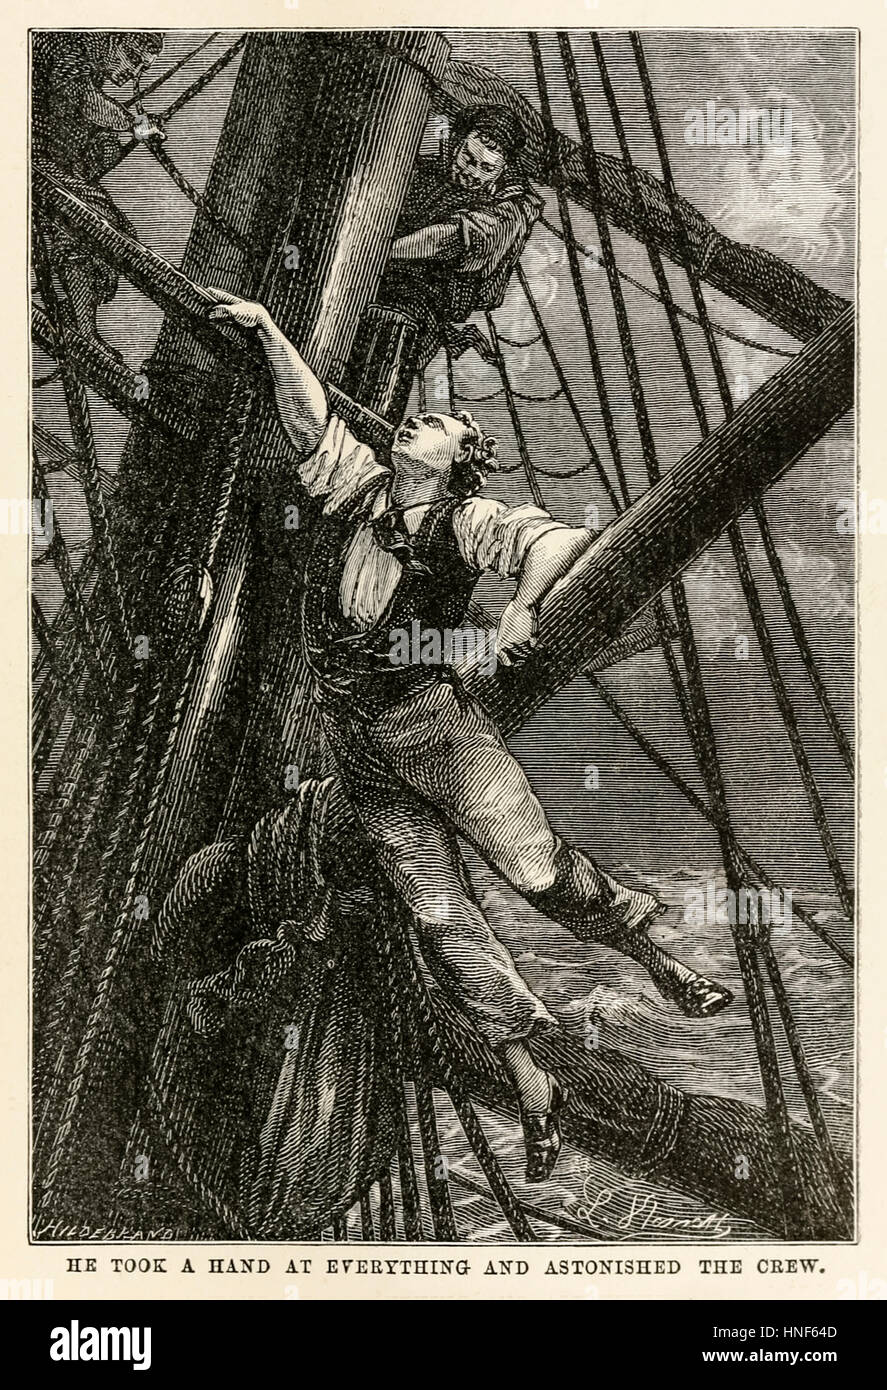 “He took a hand at everything and astonished the crew.” from ‘Around the World in Eighty Days’ by Jules Verne (1828-1905) published in 1873 with illustration by Léon Benett (1839-1917) and engraving by Henri-Théophile Hildebrand (1824-1897). Stock Photo